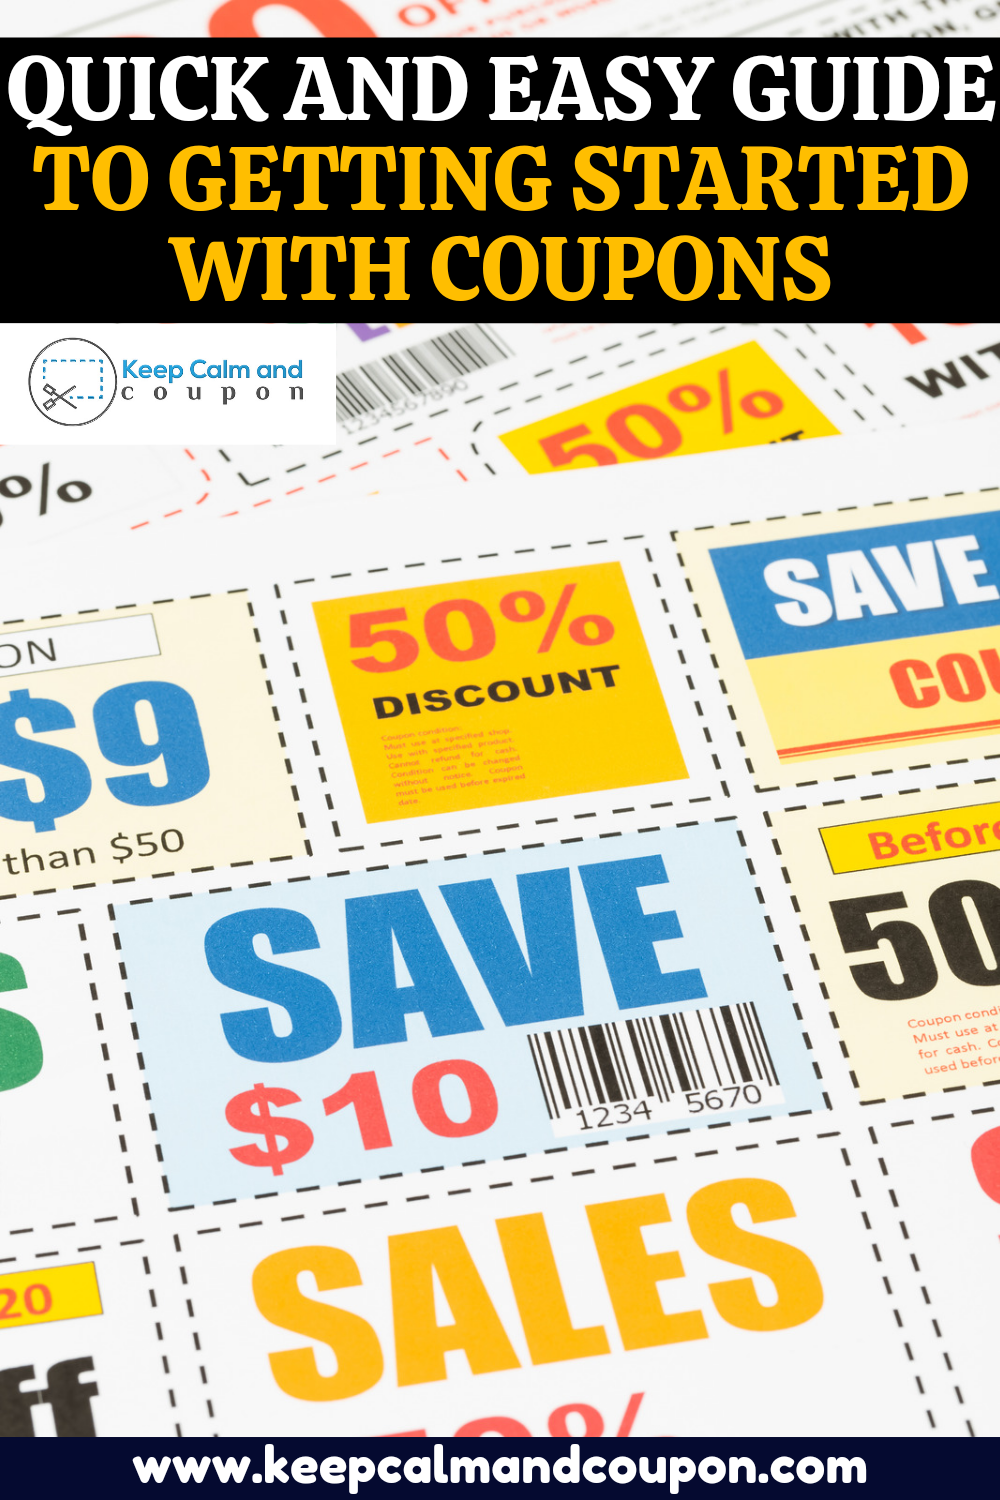 Quick and Easy Guide to Getting Started with Coupons